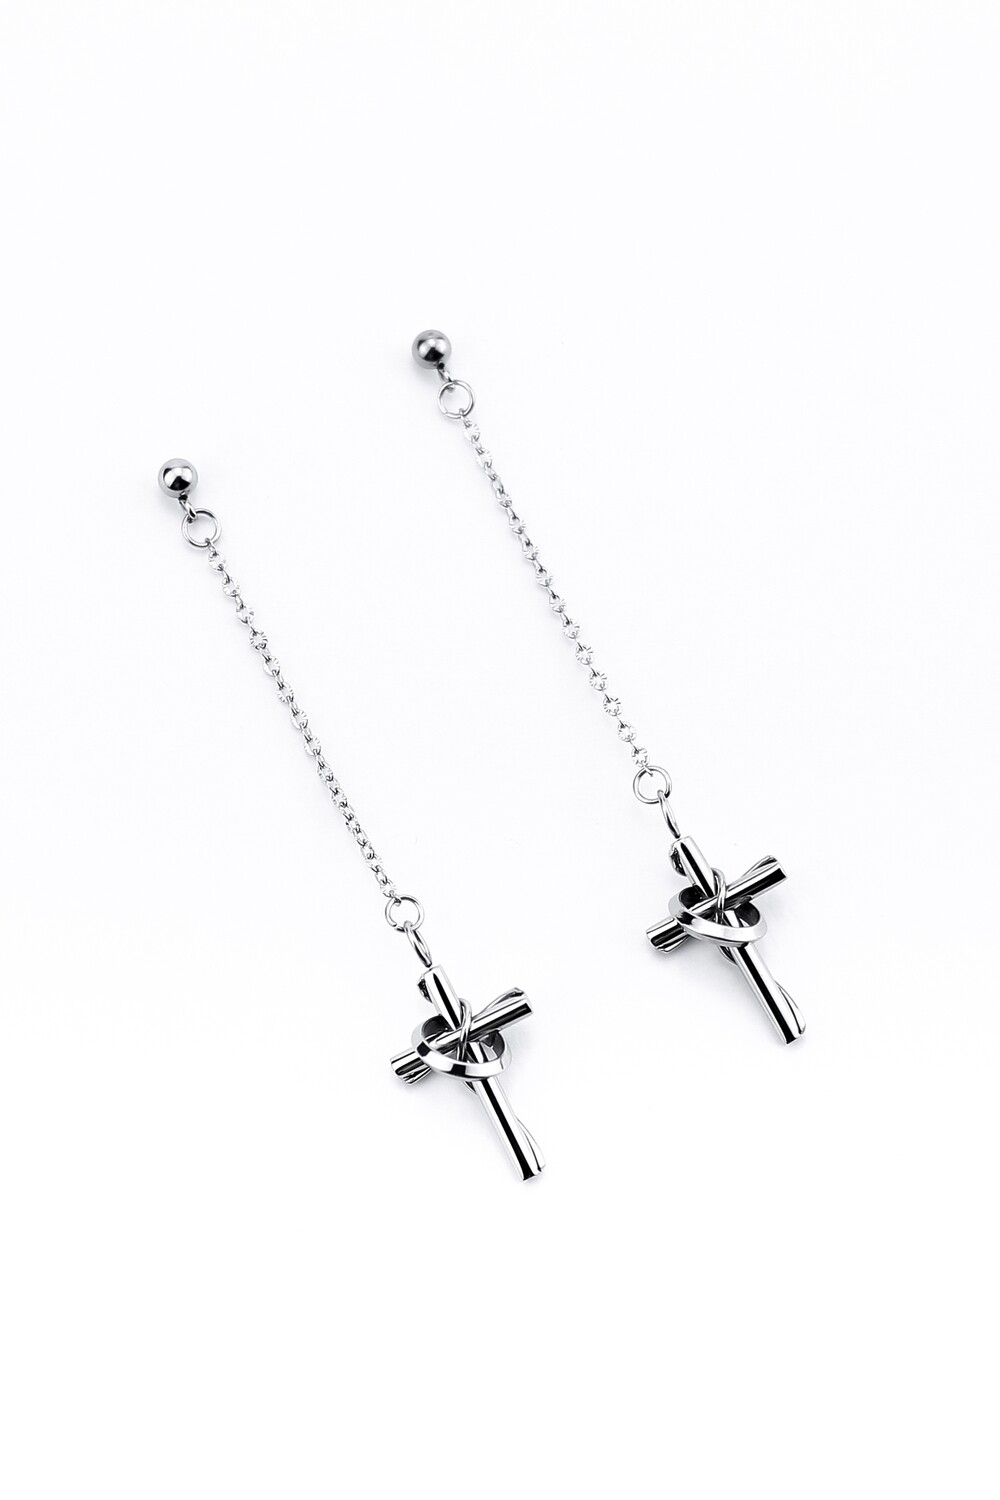 Earrings "Cross with interlacing on a chain"